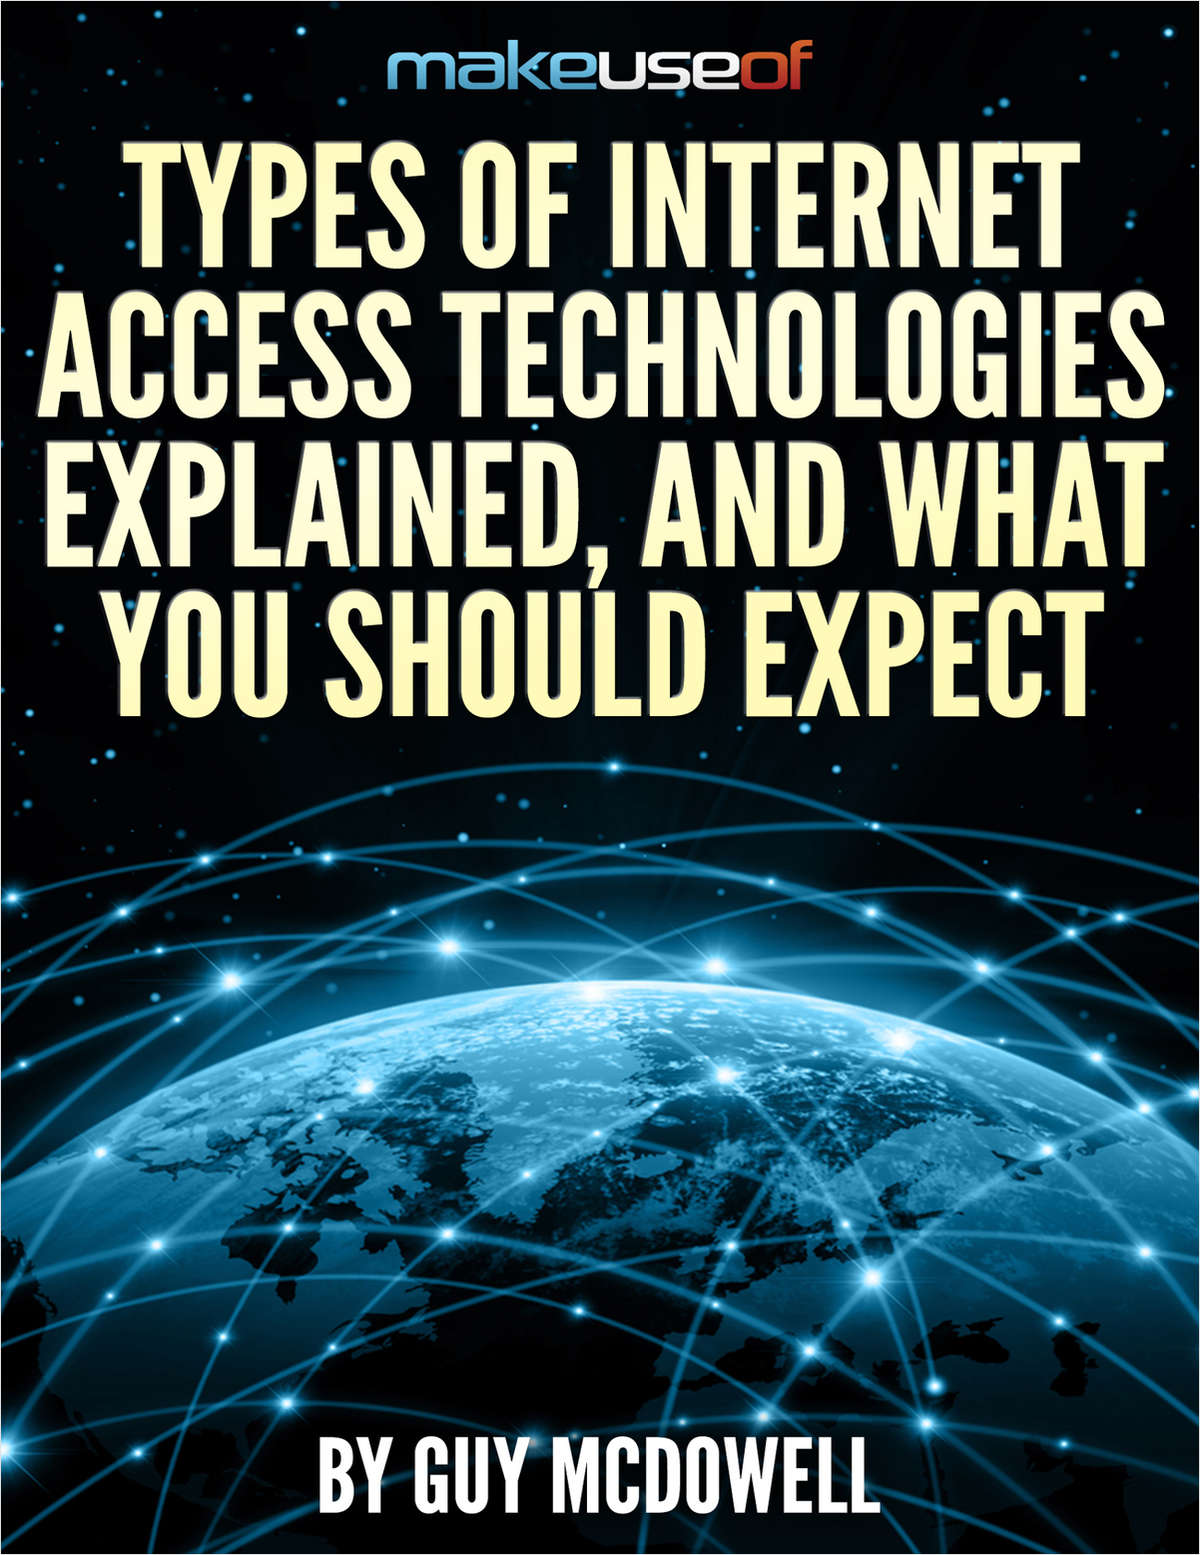 Types Of Internet Access Technologies Explained, And What You Should Expect